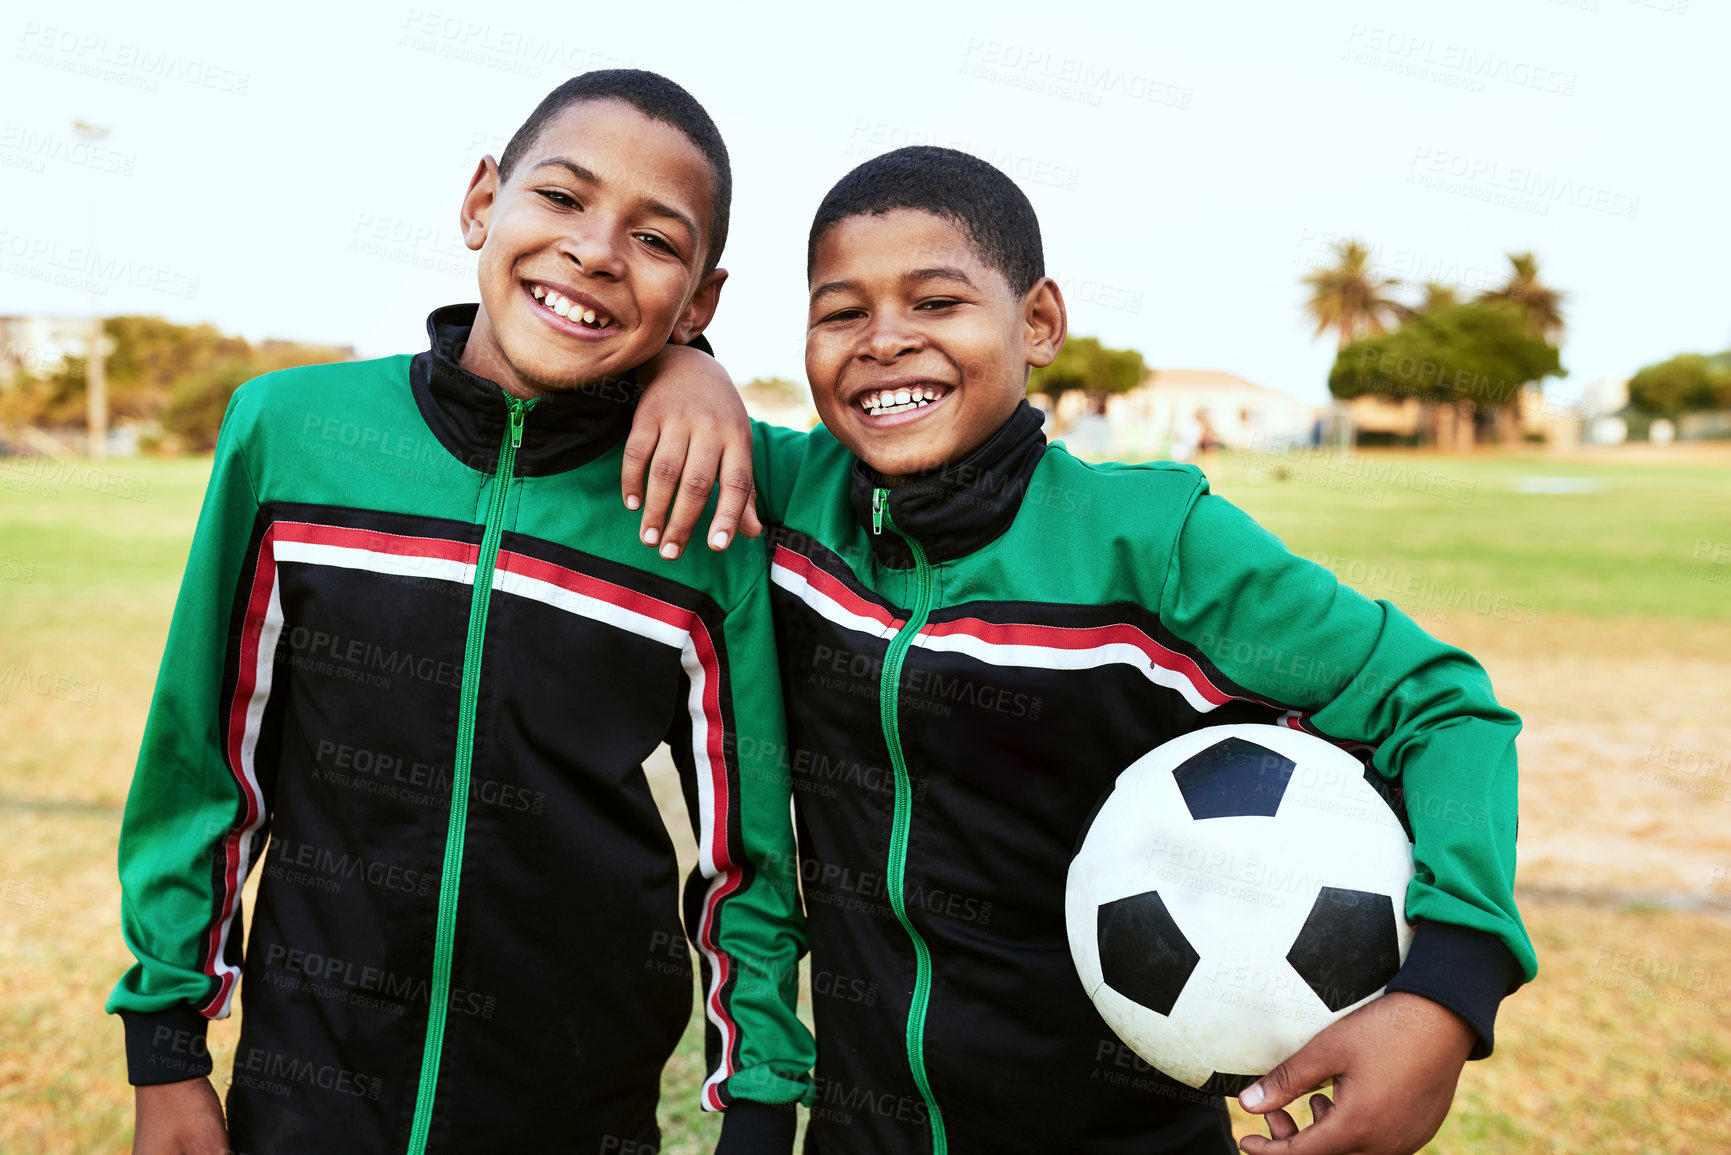 Buy stock photo Portrait of two young boys playing soccer on a sports field